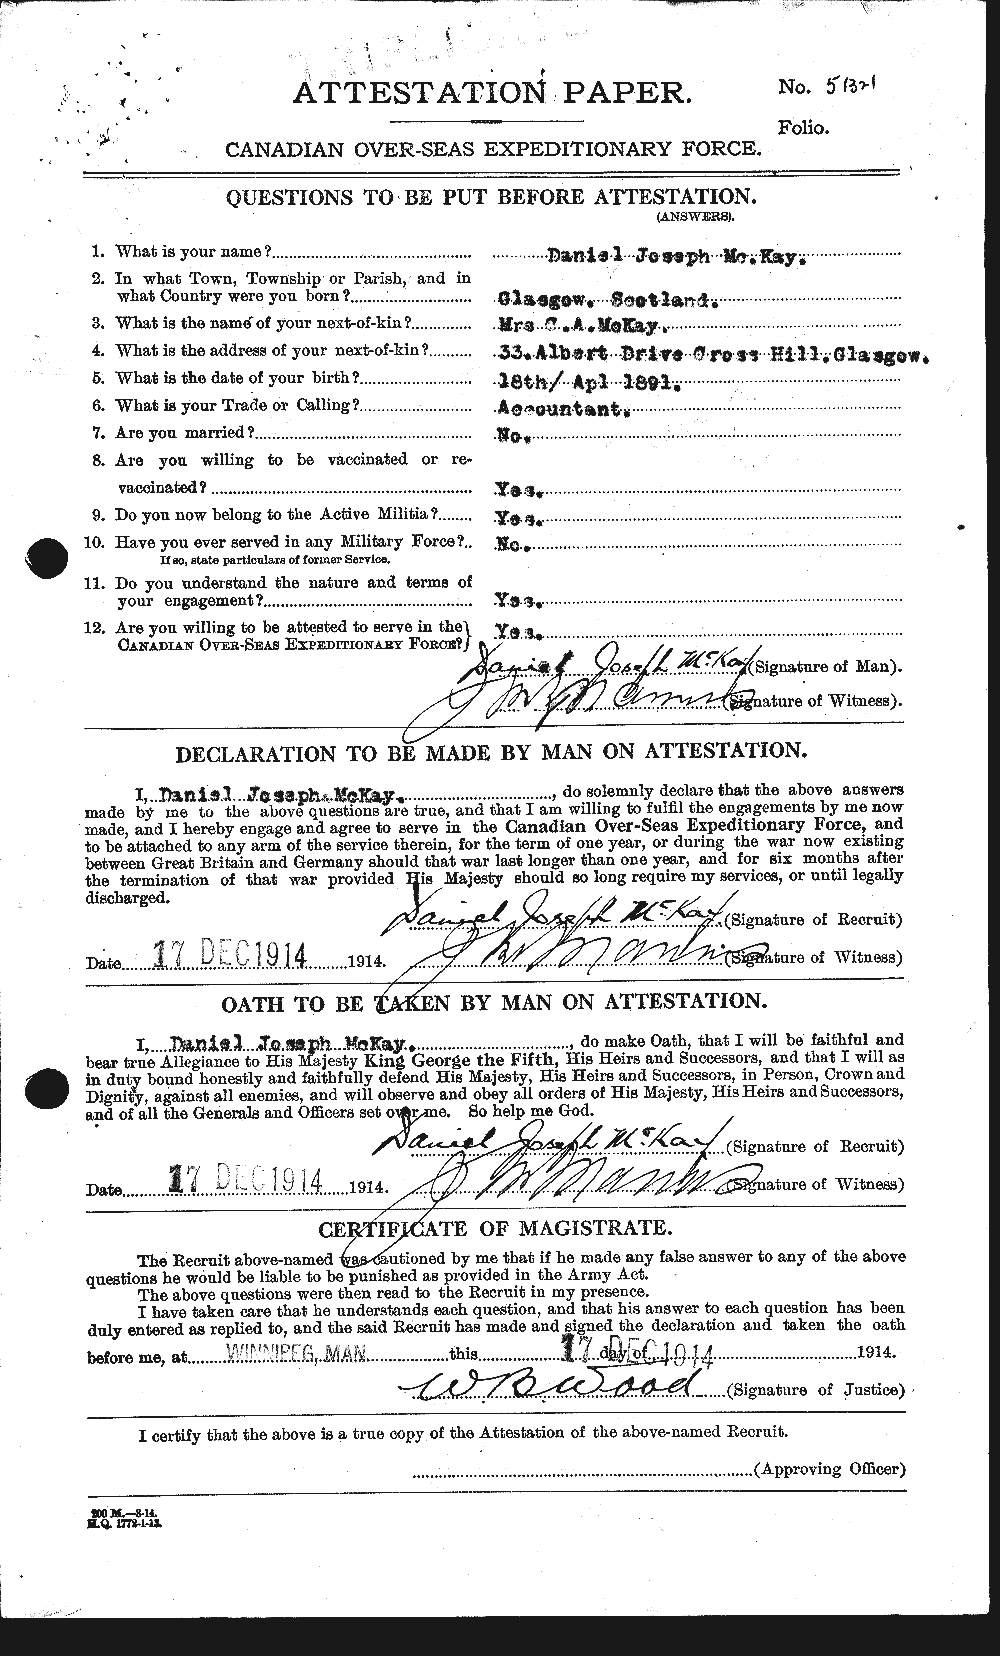 Personnel Records of the First World War - CEF 531121a